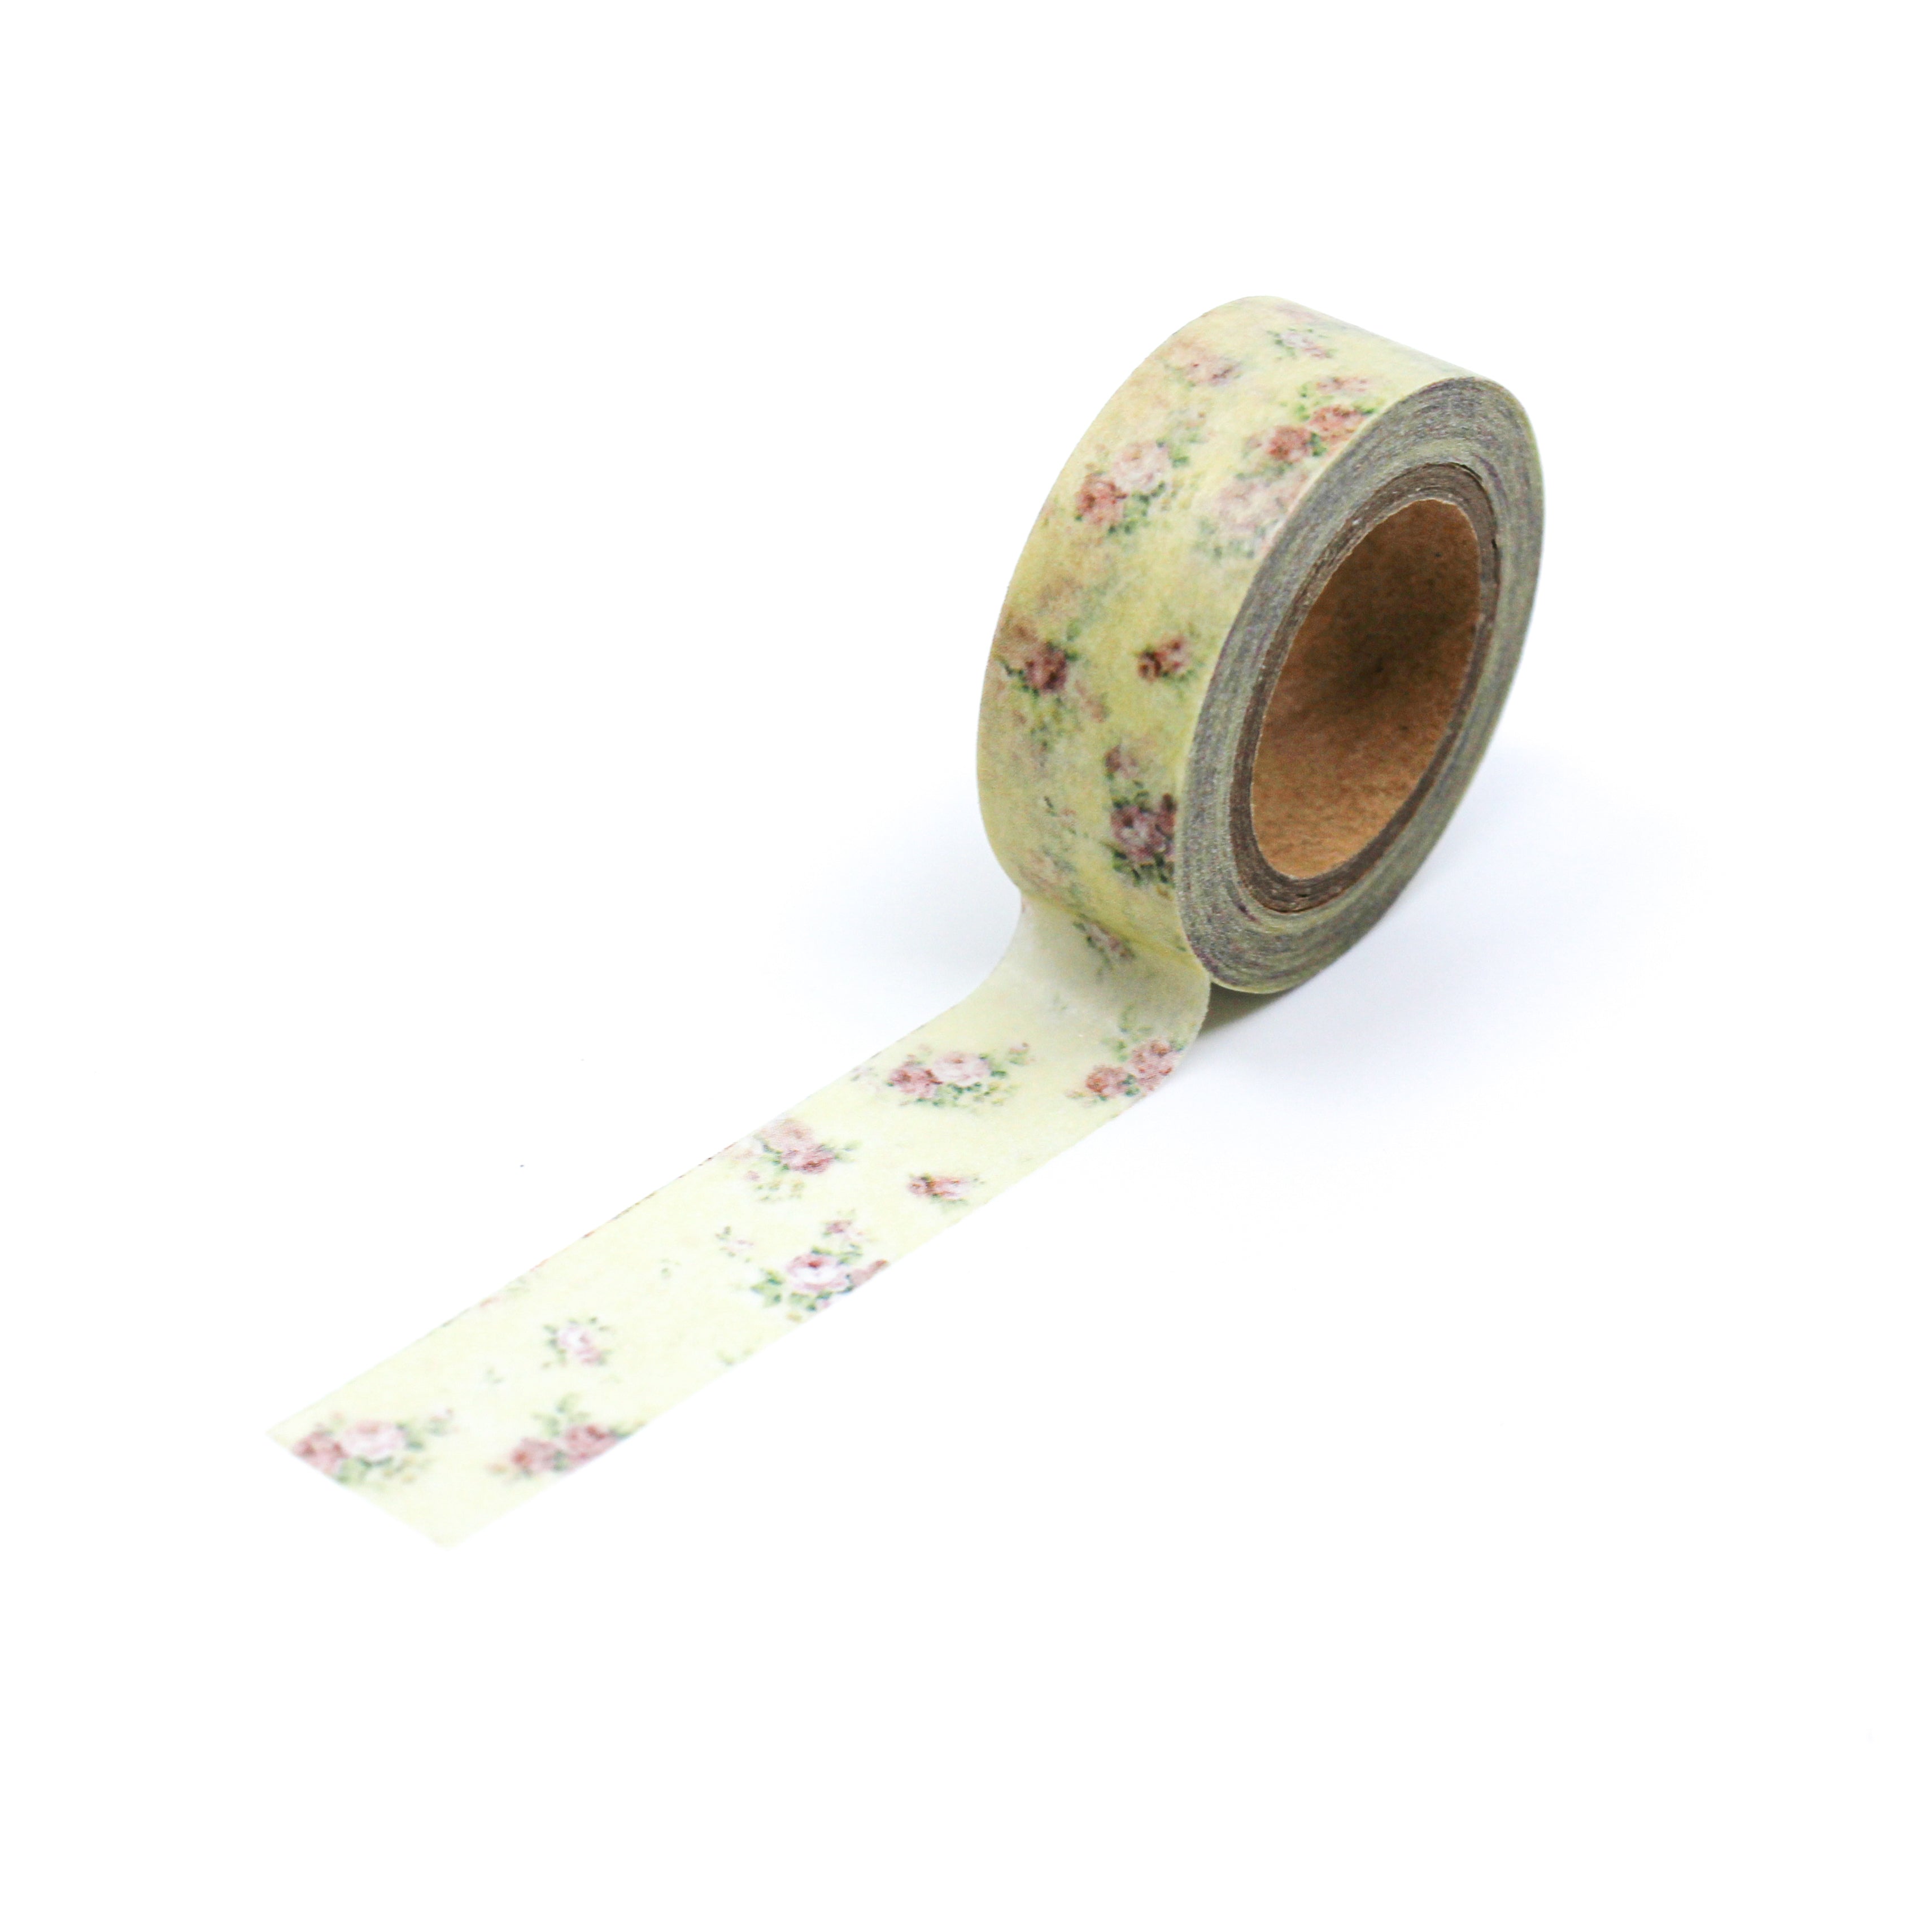 This is a full pattern repeat view of colorful flowers in vintage design Washi Tape from BBB Supplies Craft Shop